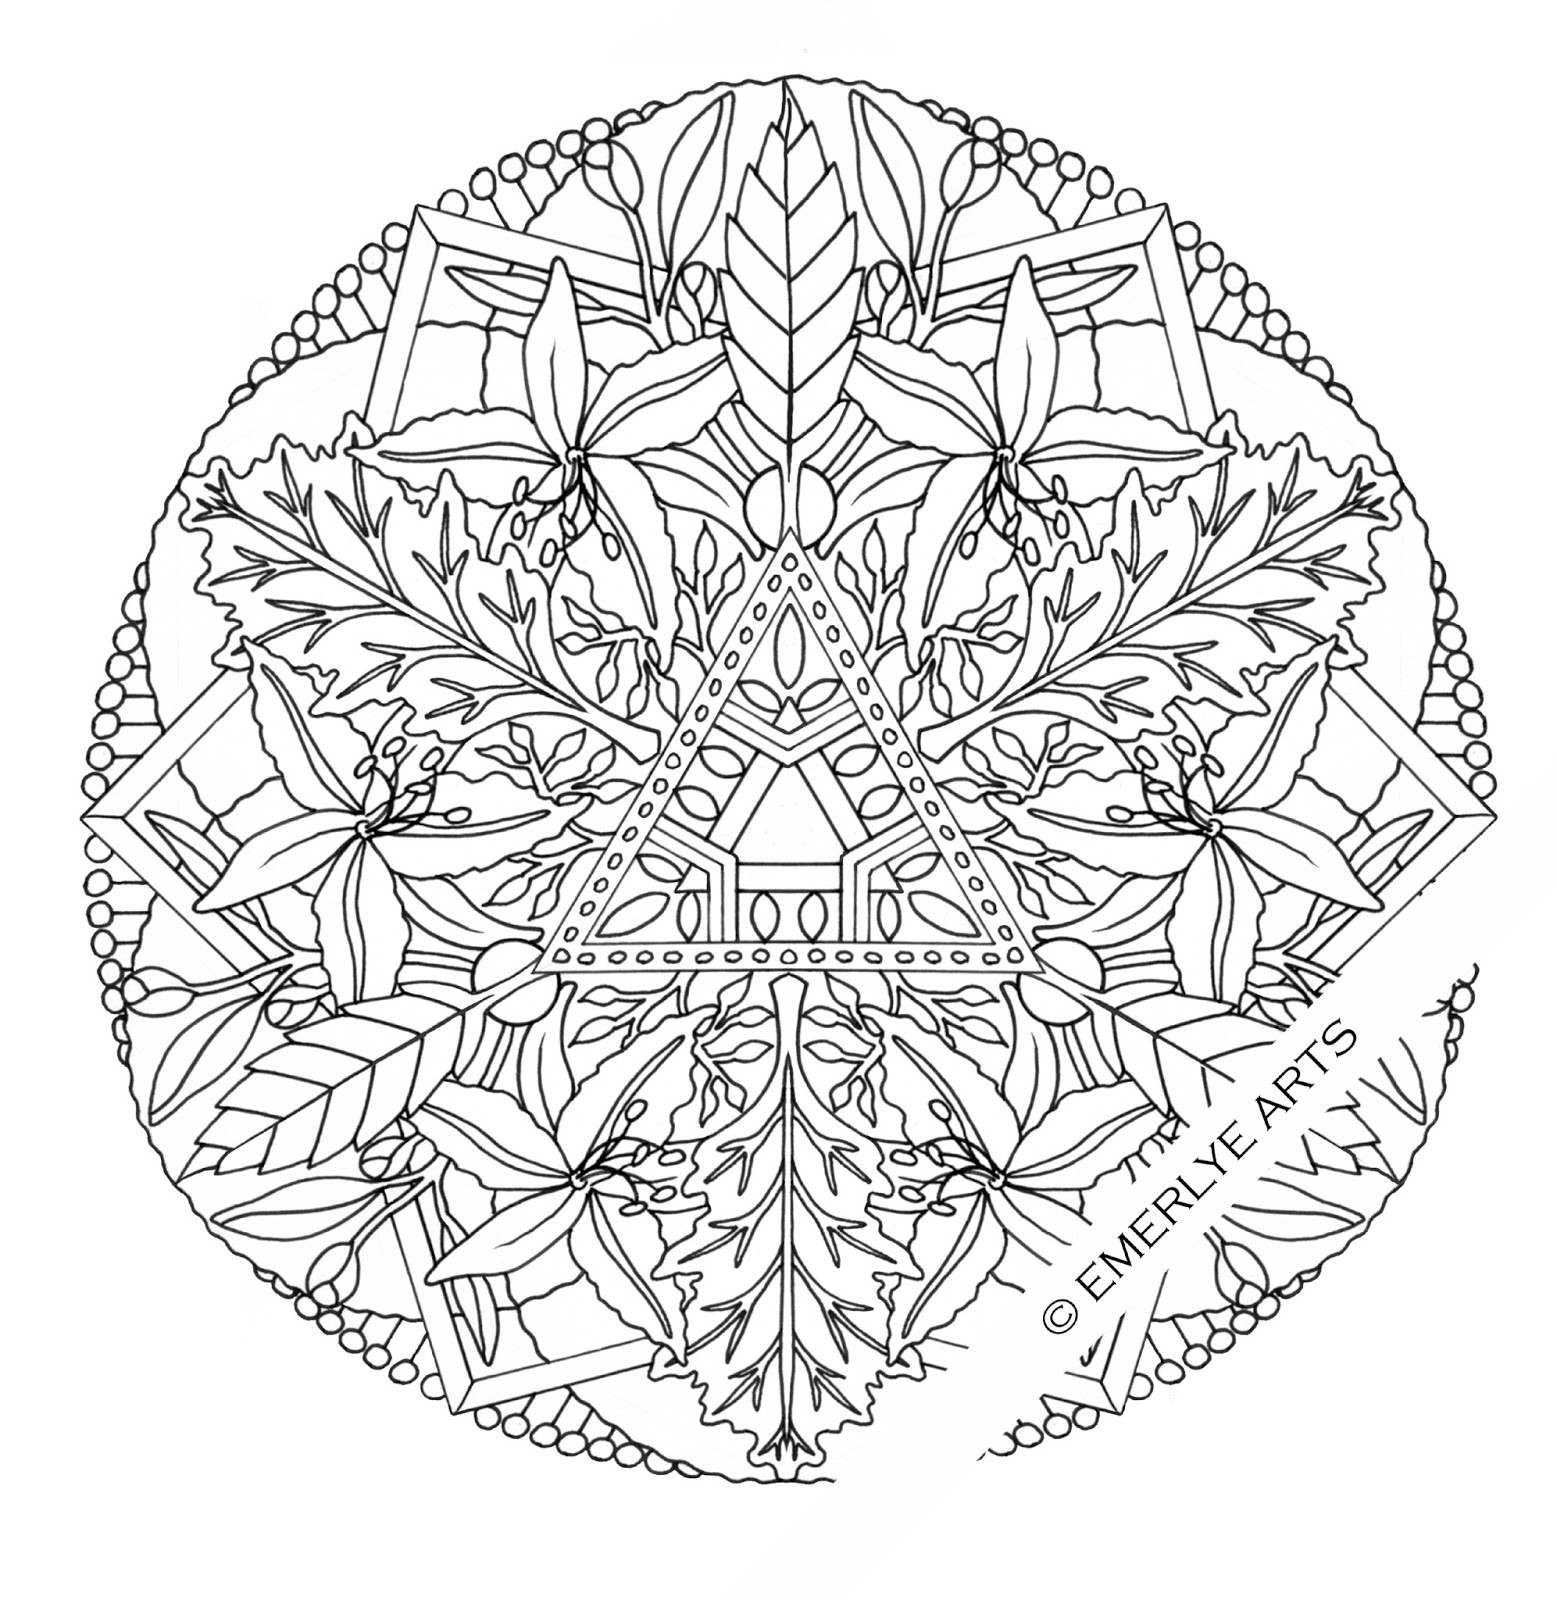 Adult Coloring Book Images
 Animal Coloring Pages for Adults Bestofcoloring